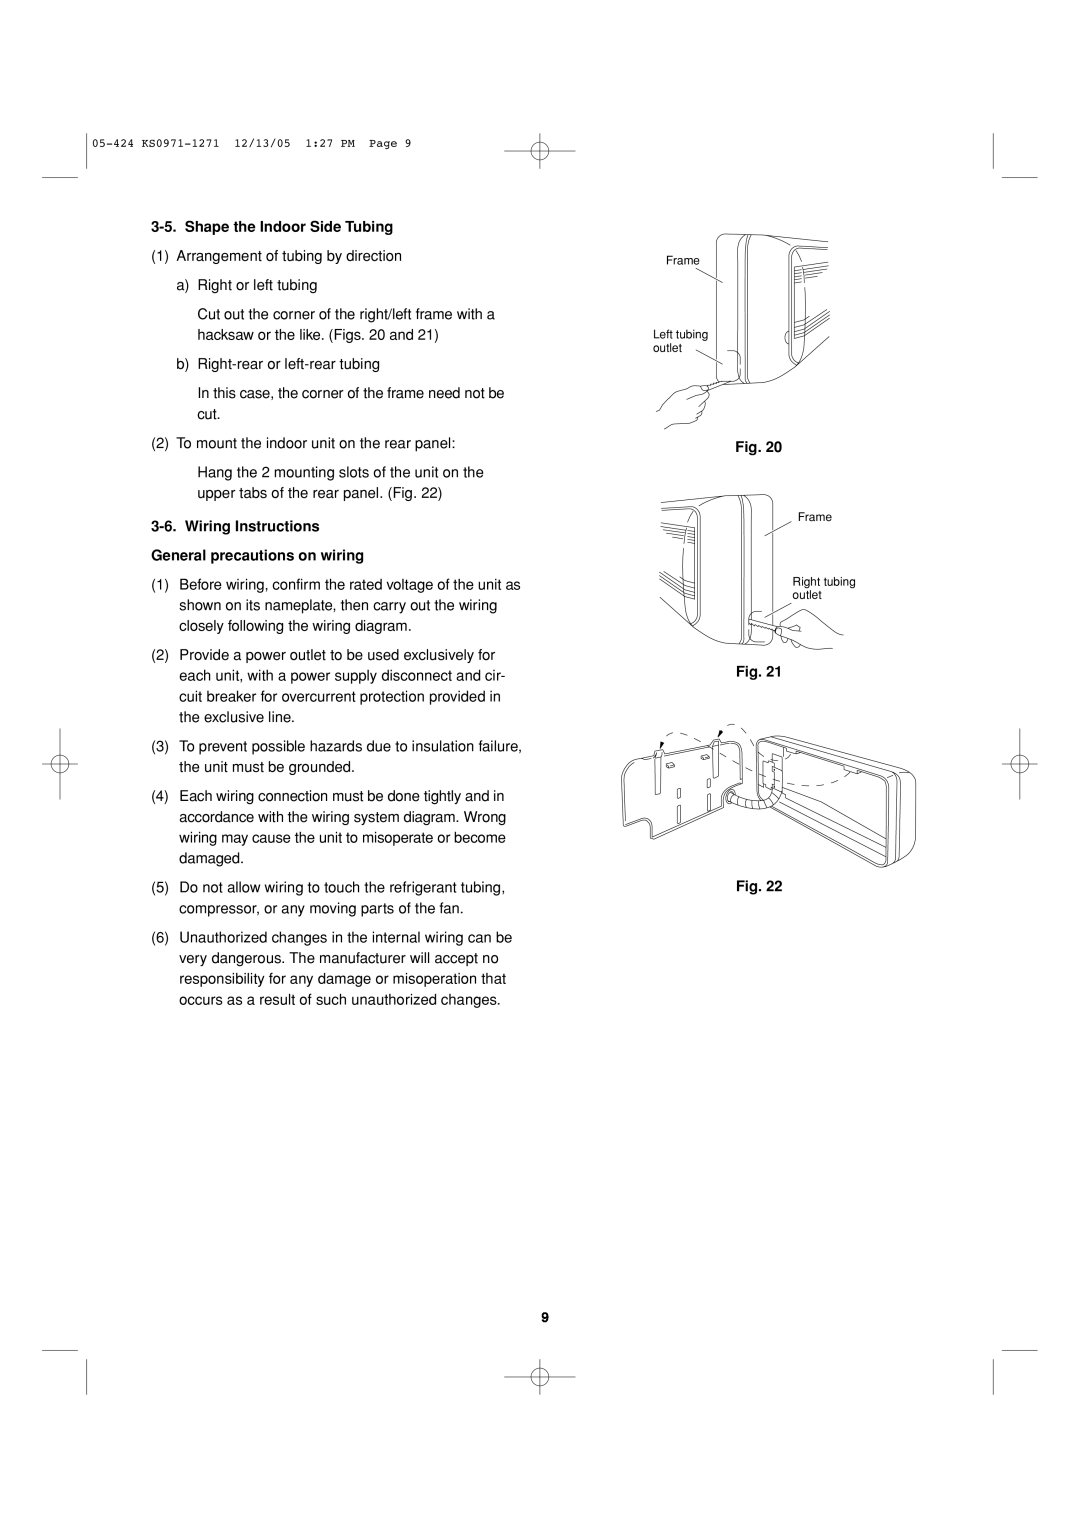 Sanyo Cool/Dry Shape the Indoor Side Tubing, Wiring Instructions, General precautions on wiring, Fig. Fig 